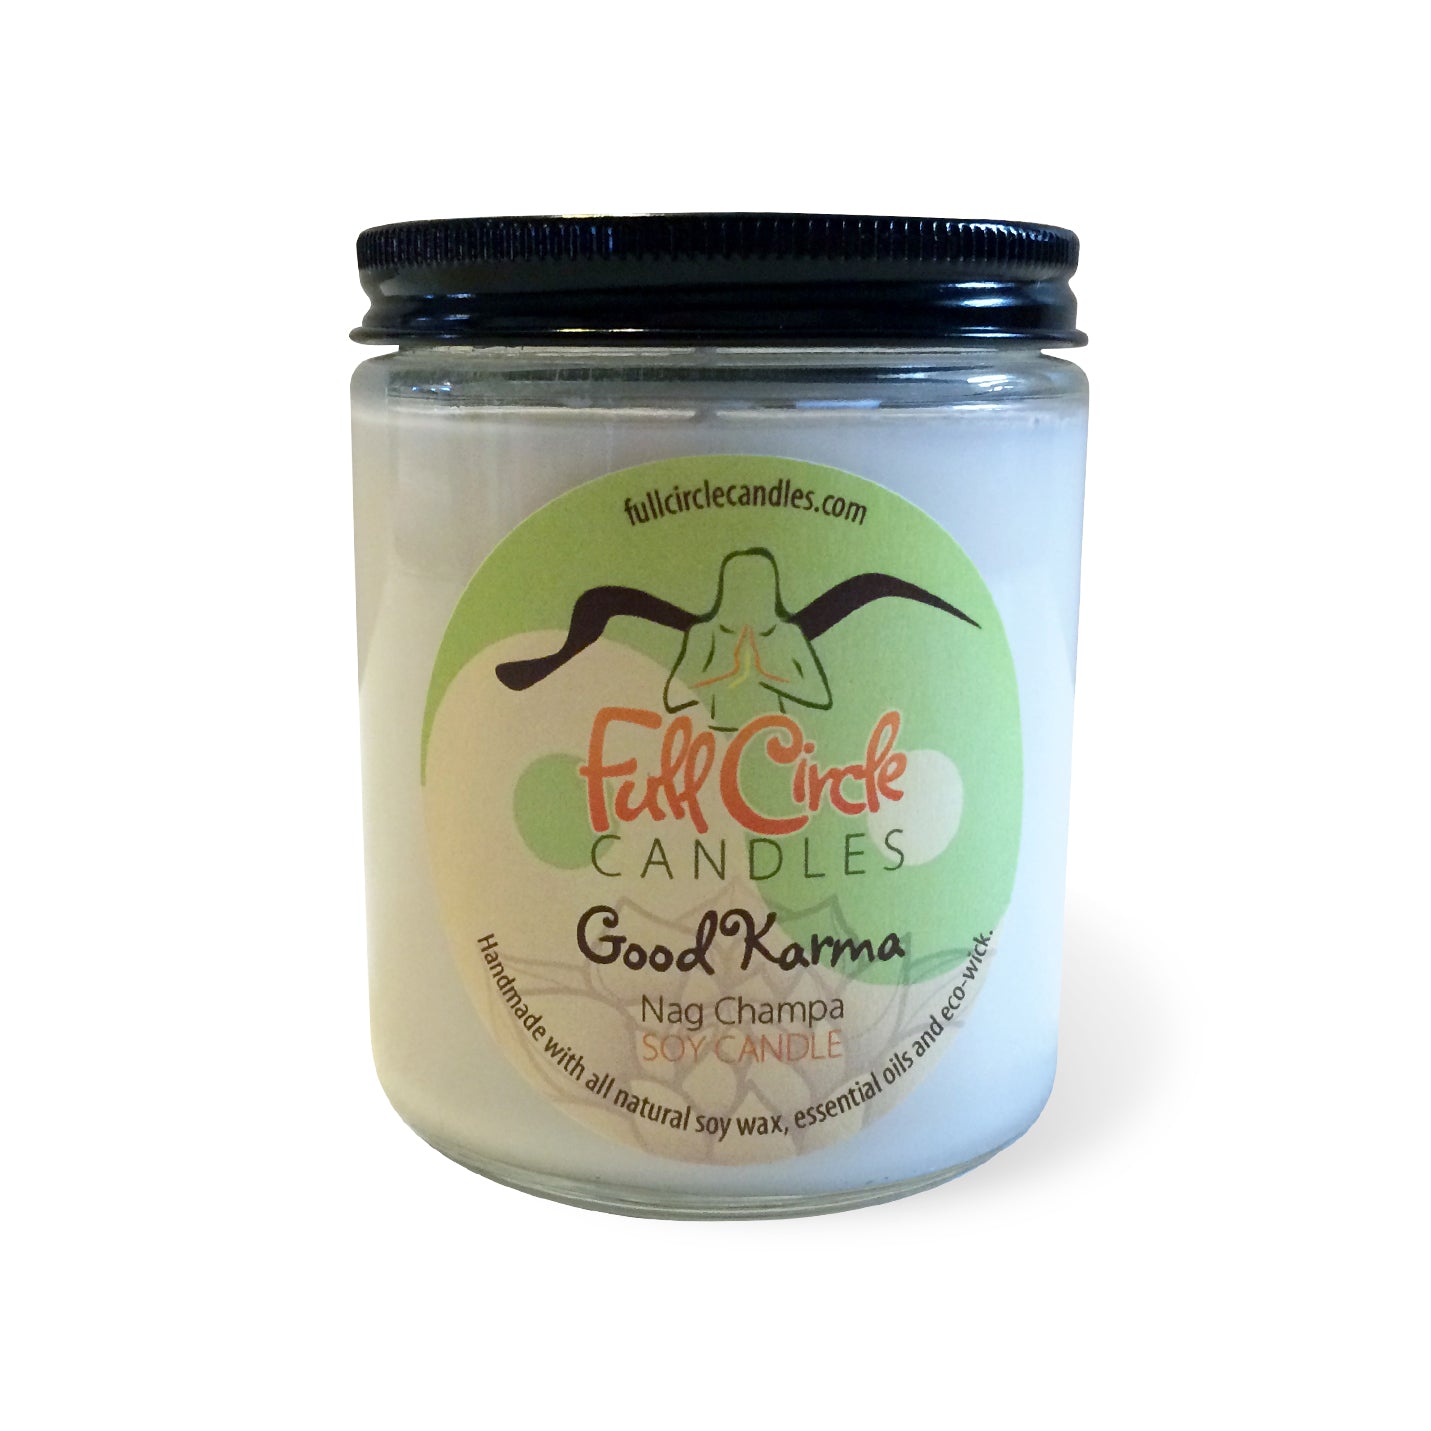 Nag Champa Scented Soy Candle | Indian Incense Fragrance | Full Circle Candles